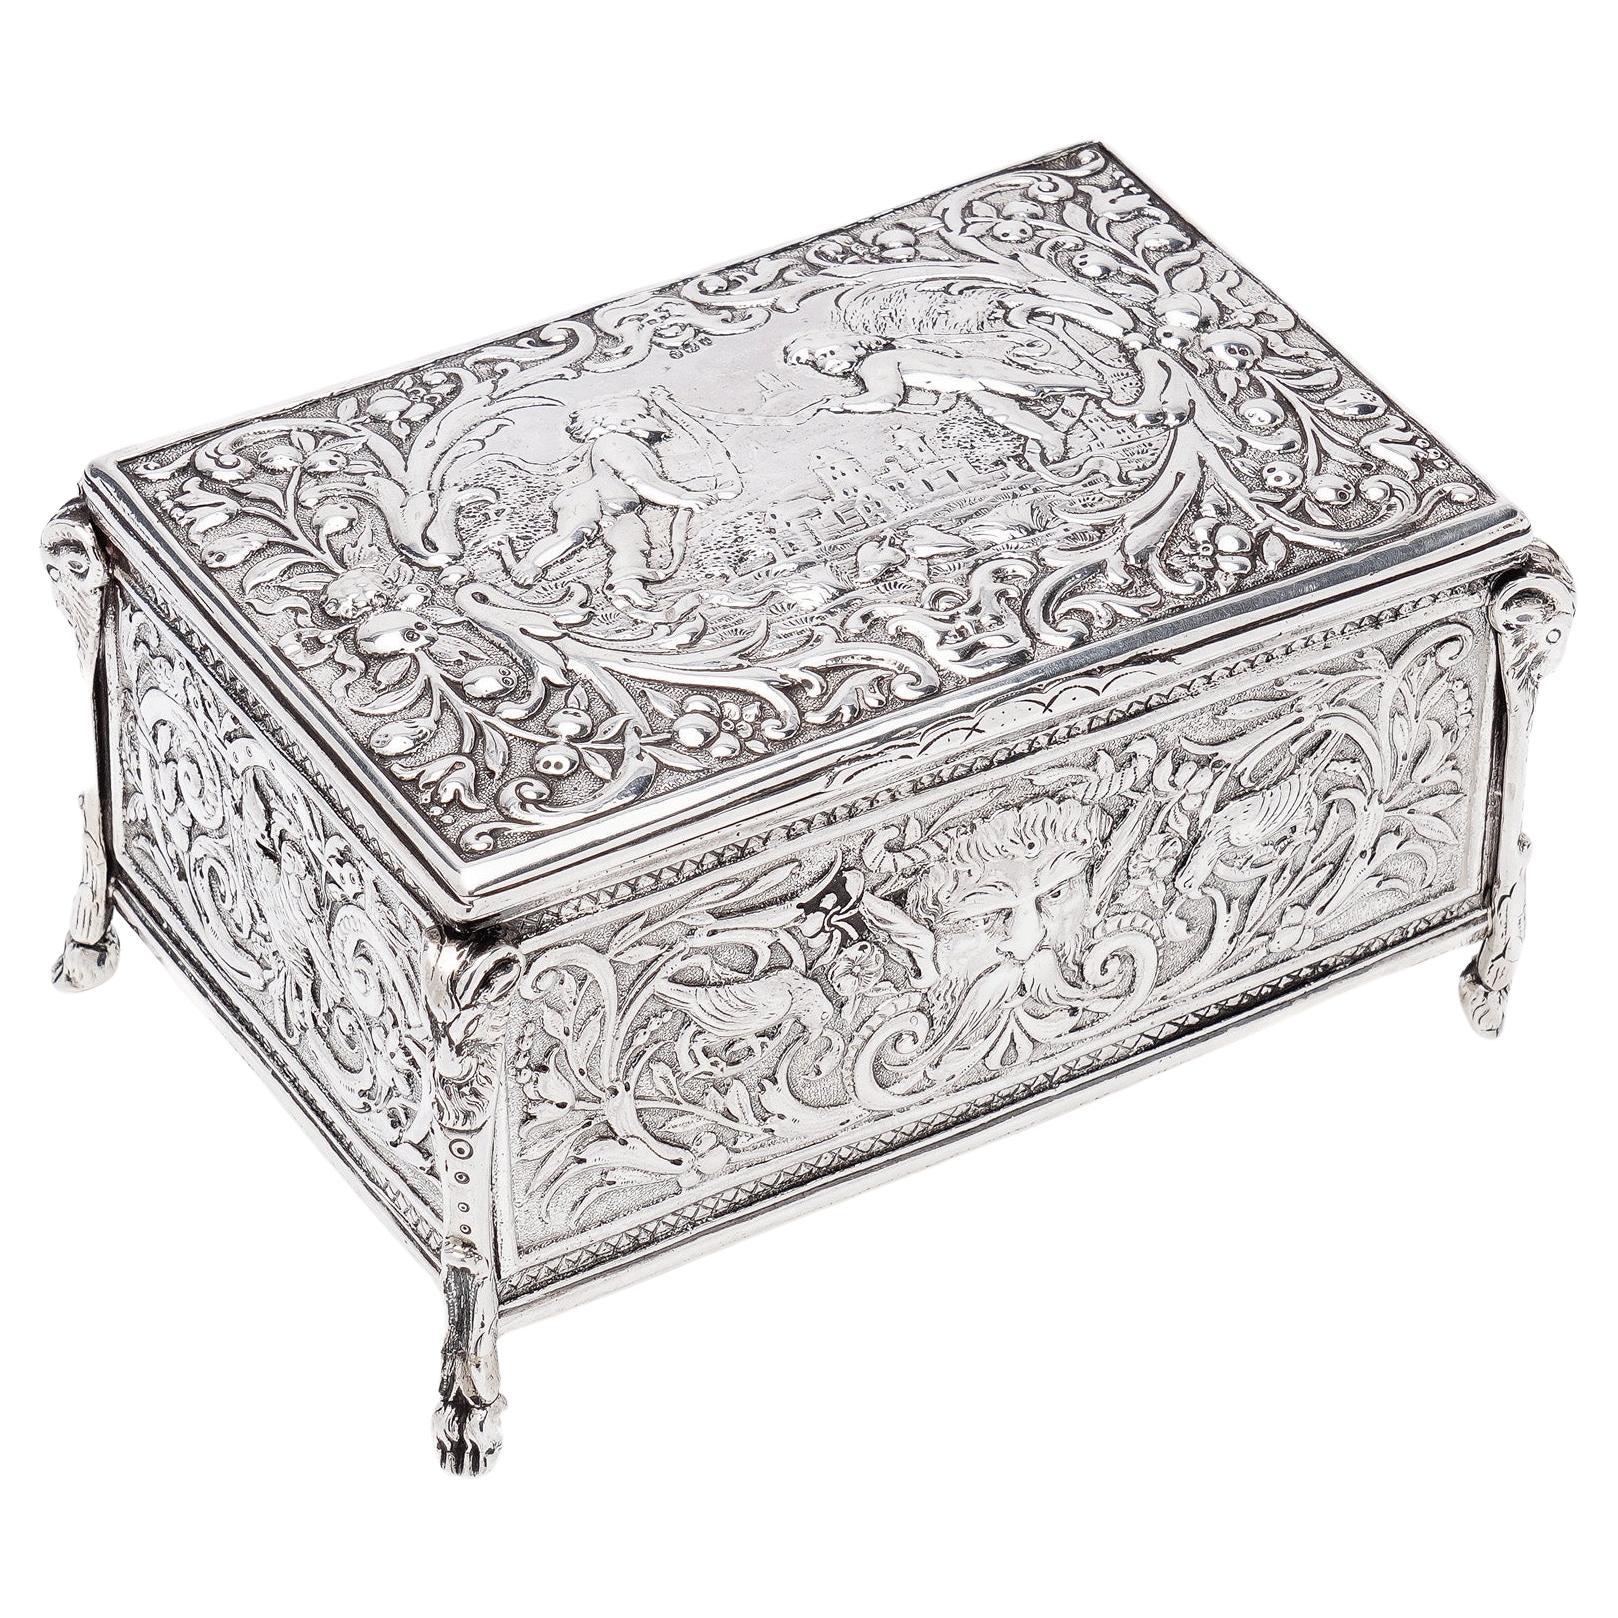 Antique Late 19th Century Silver Repoussé Decorated Jewellery Box with Cherubs For Sale